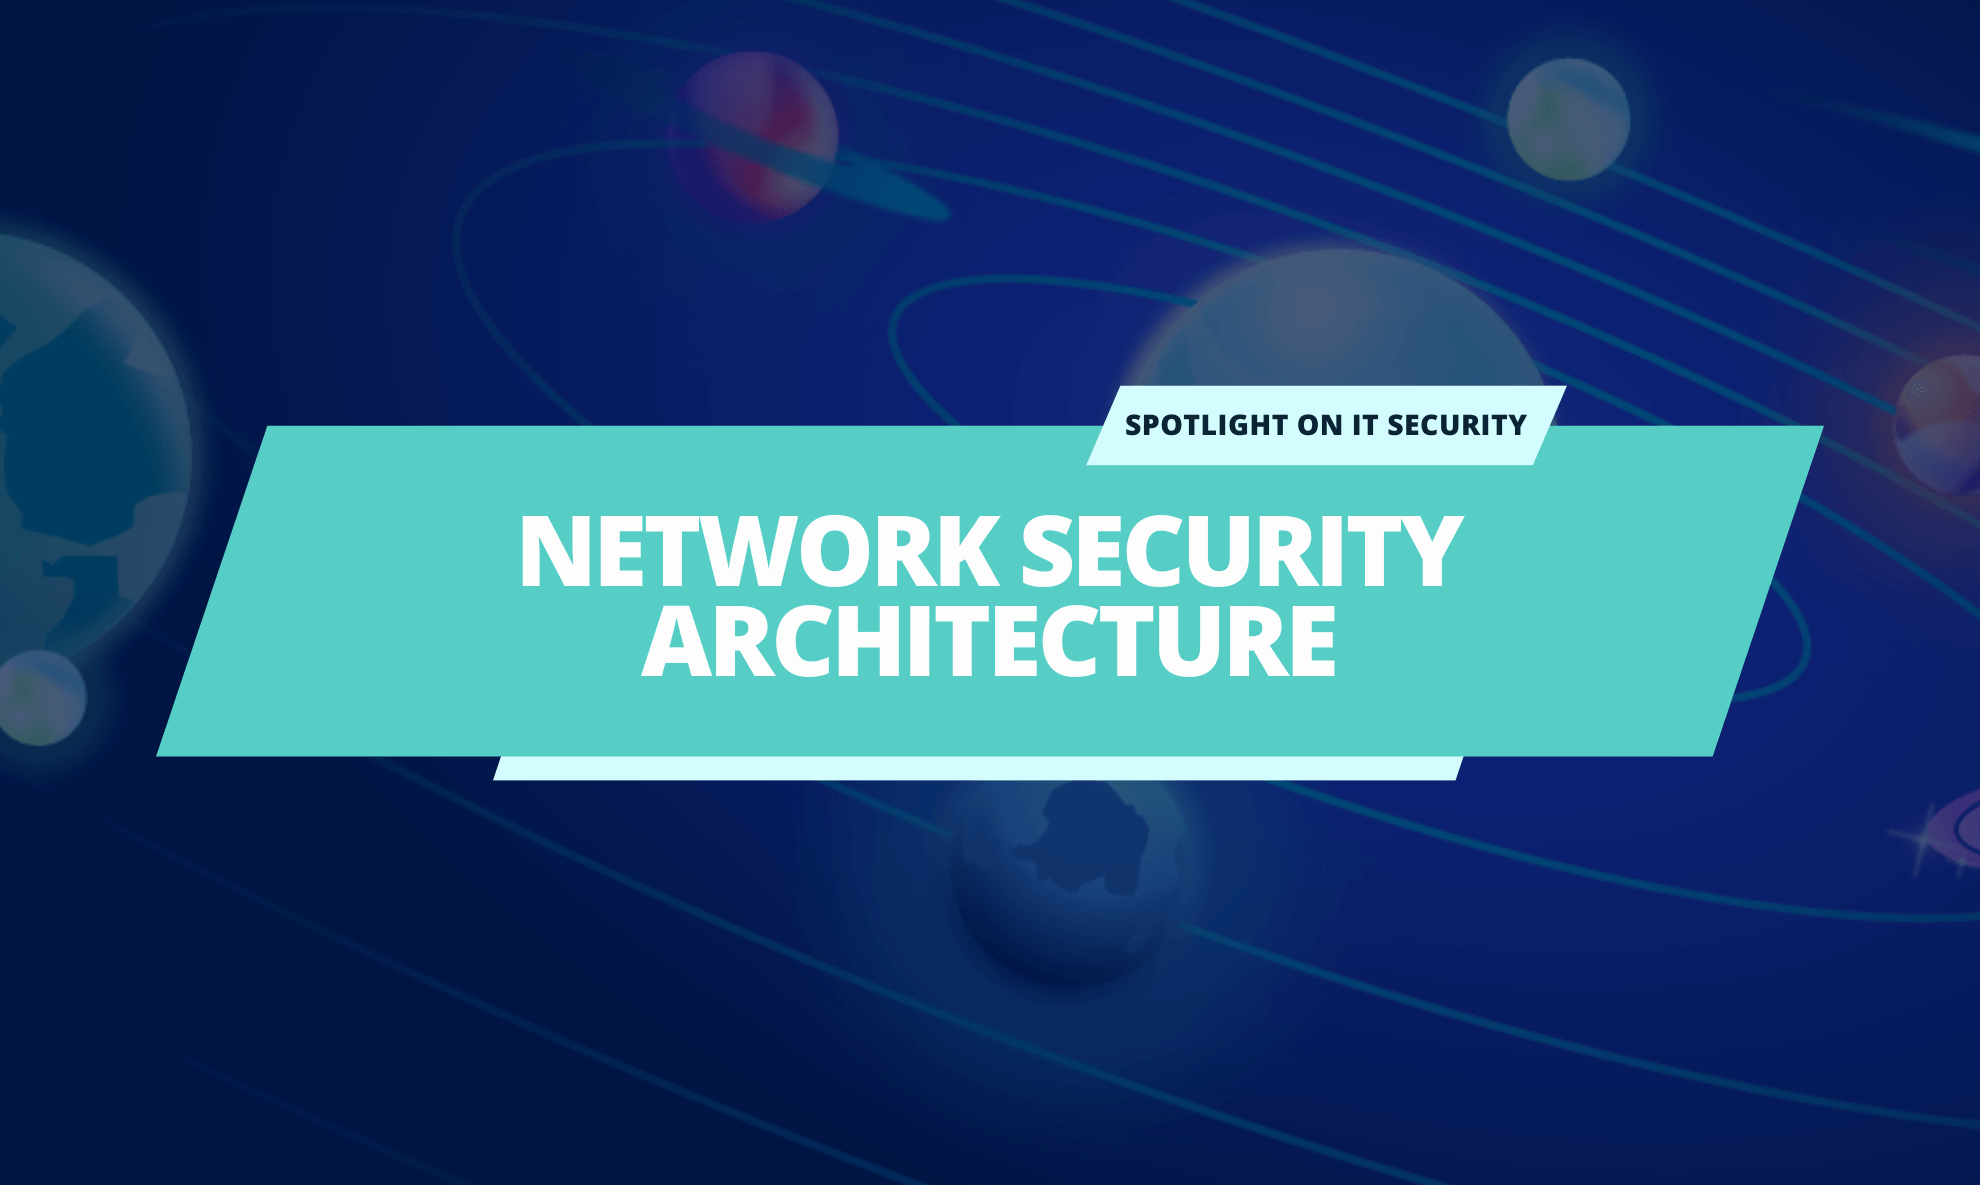 Implementing a Network Security Architecture and CIS Controls